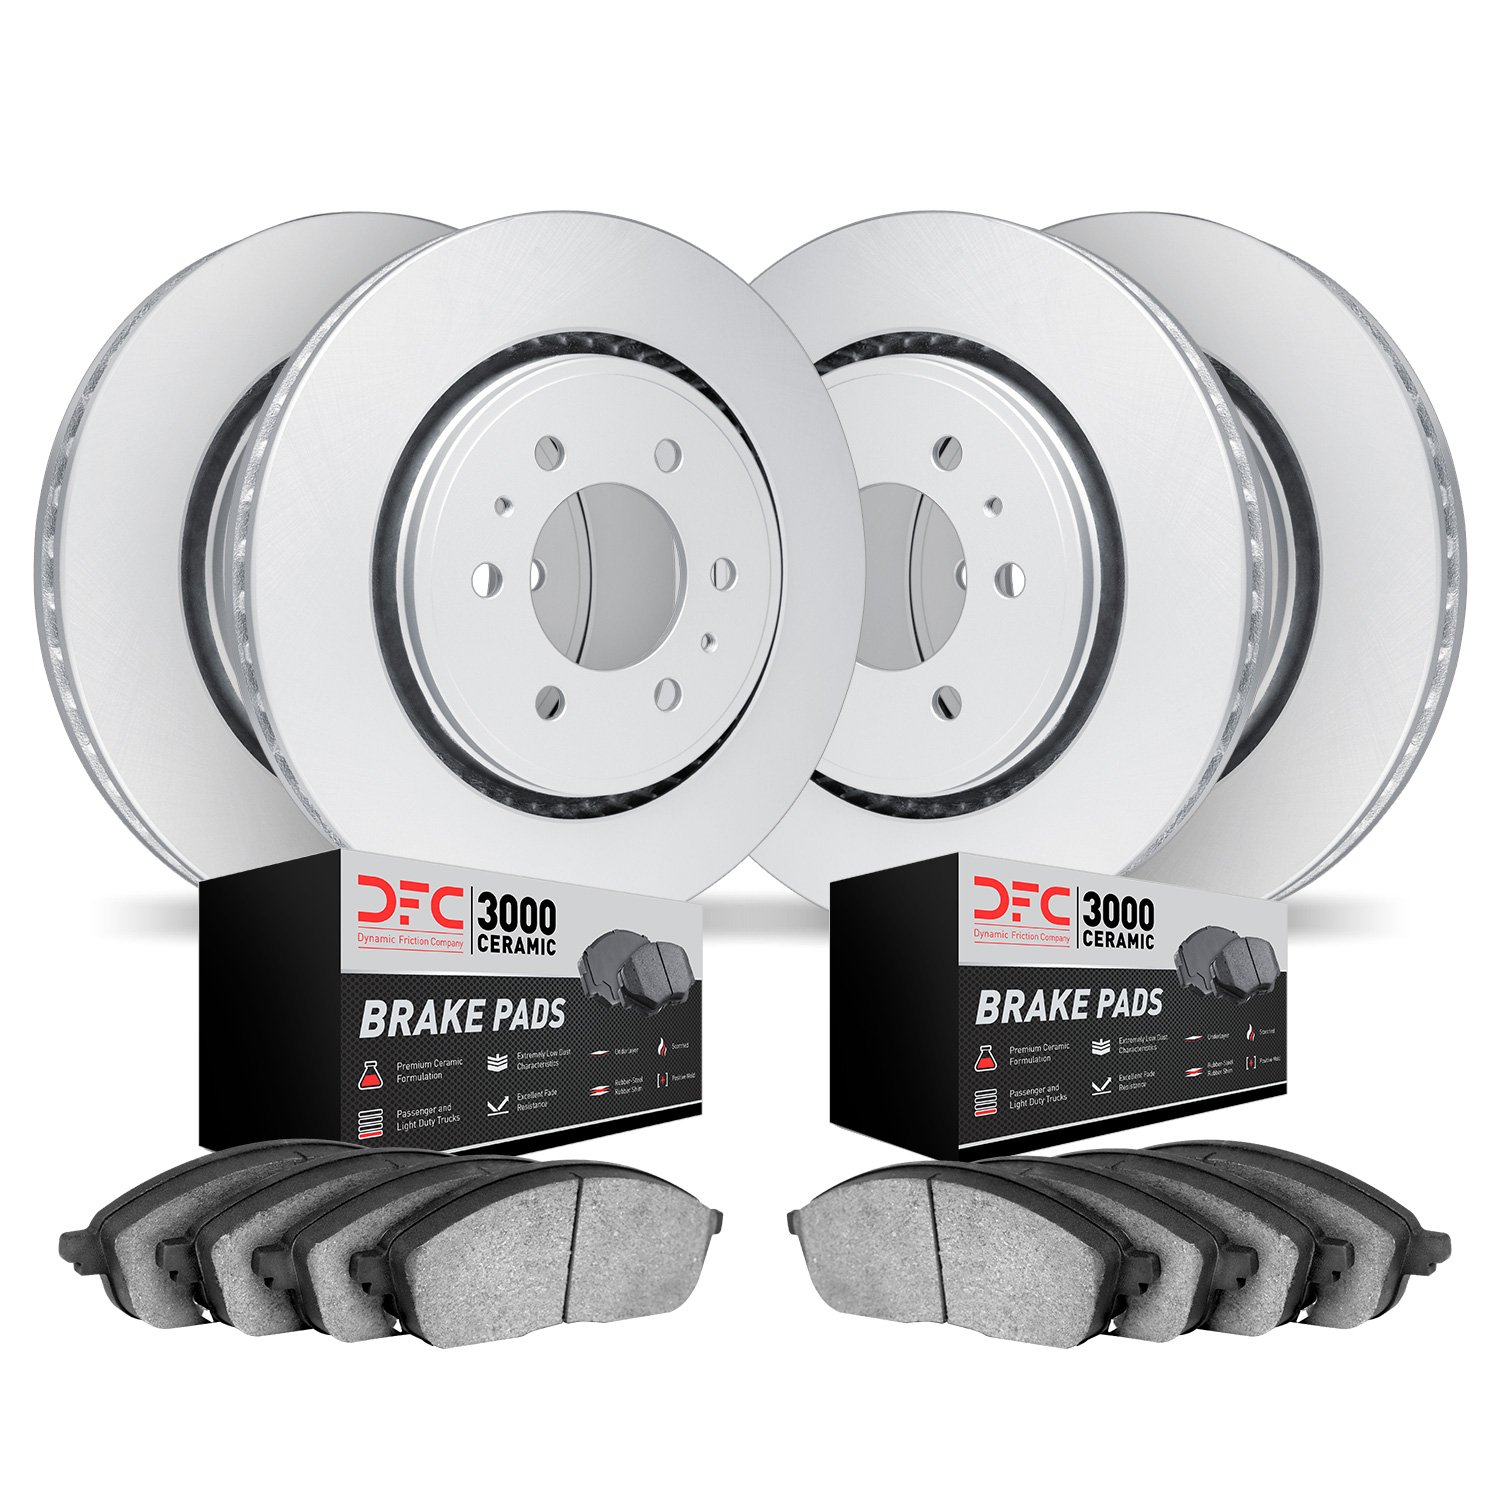 4304-67040 Geospec Brake Rotors with 3000-Series Ceramic Brake Pads Kit, Fits Select Infiniti/Nissan, Position: Front and Rear